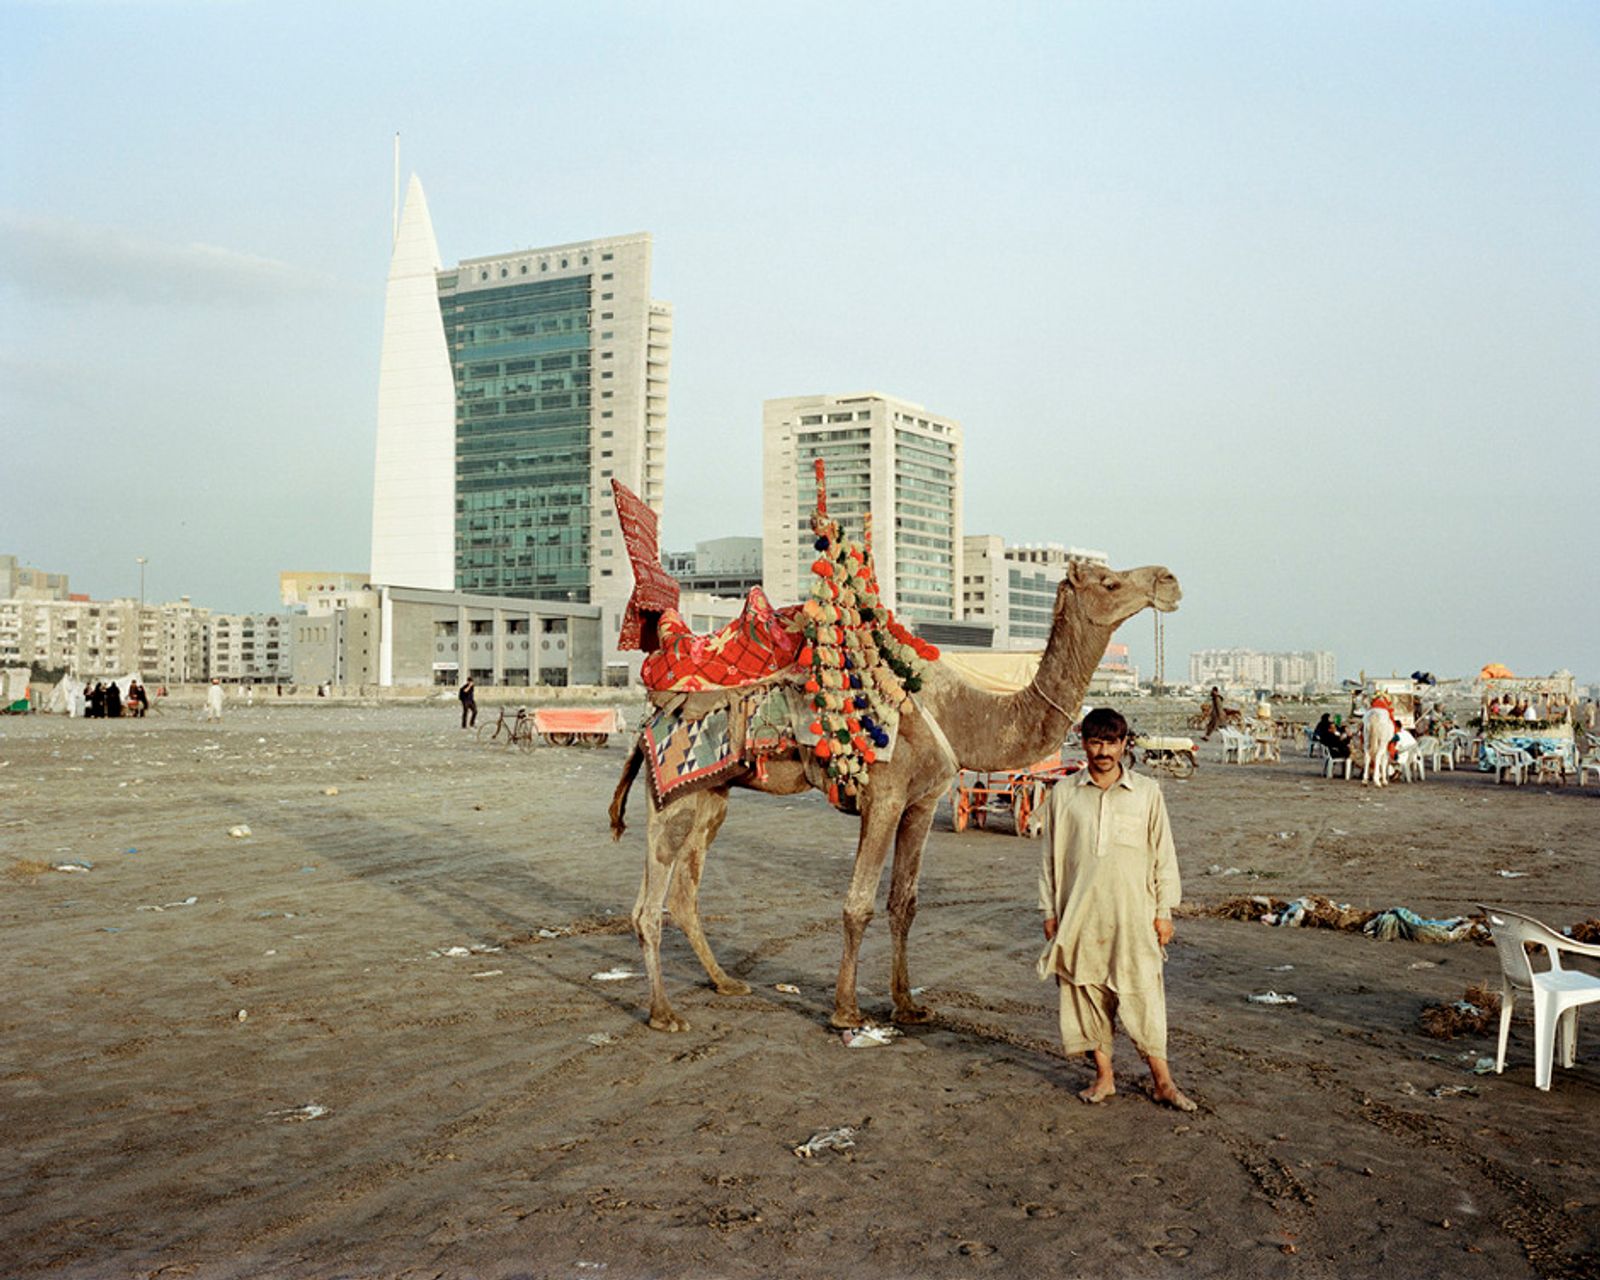 © Valentino Bellini - Image from the Karachi_City of Eagles photography project